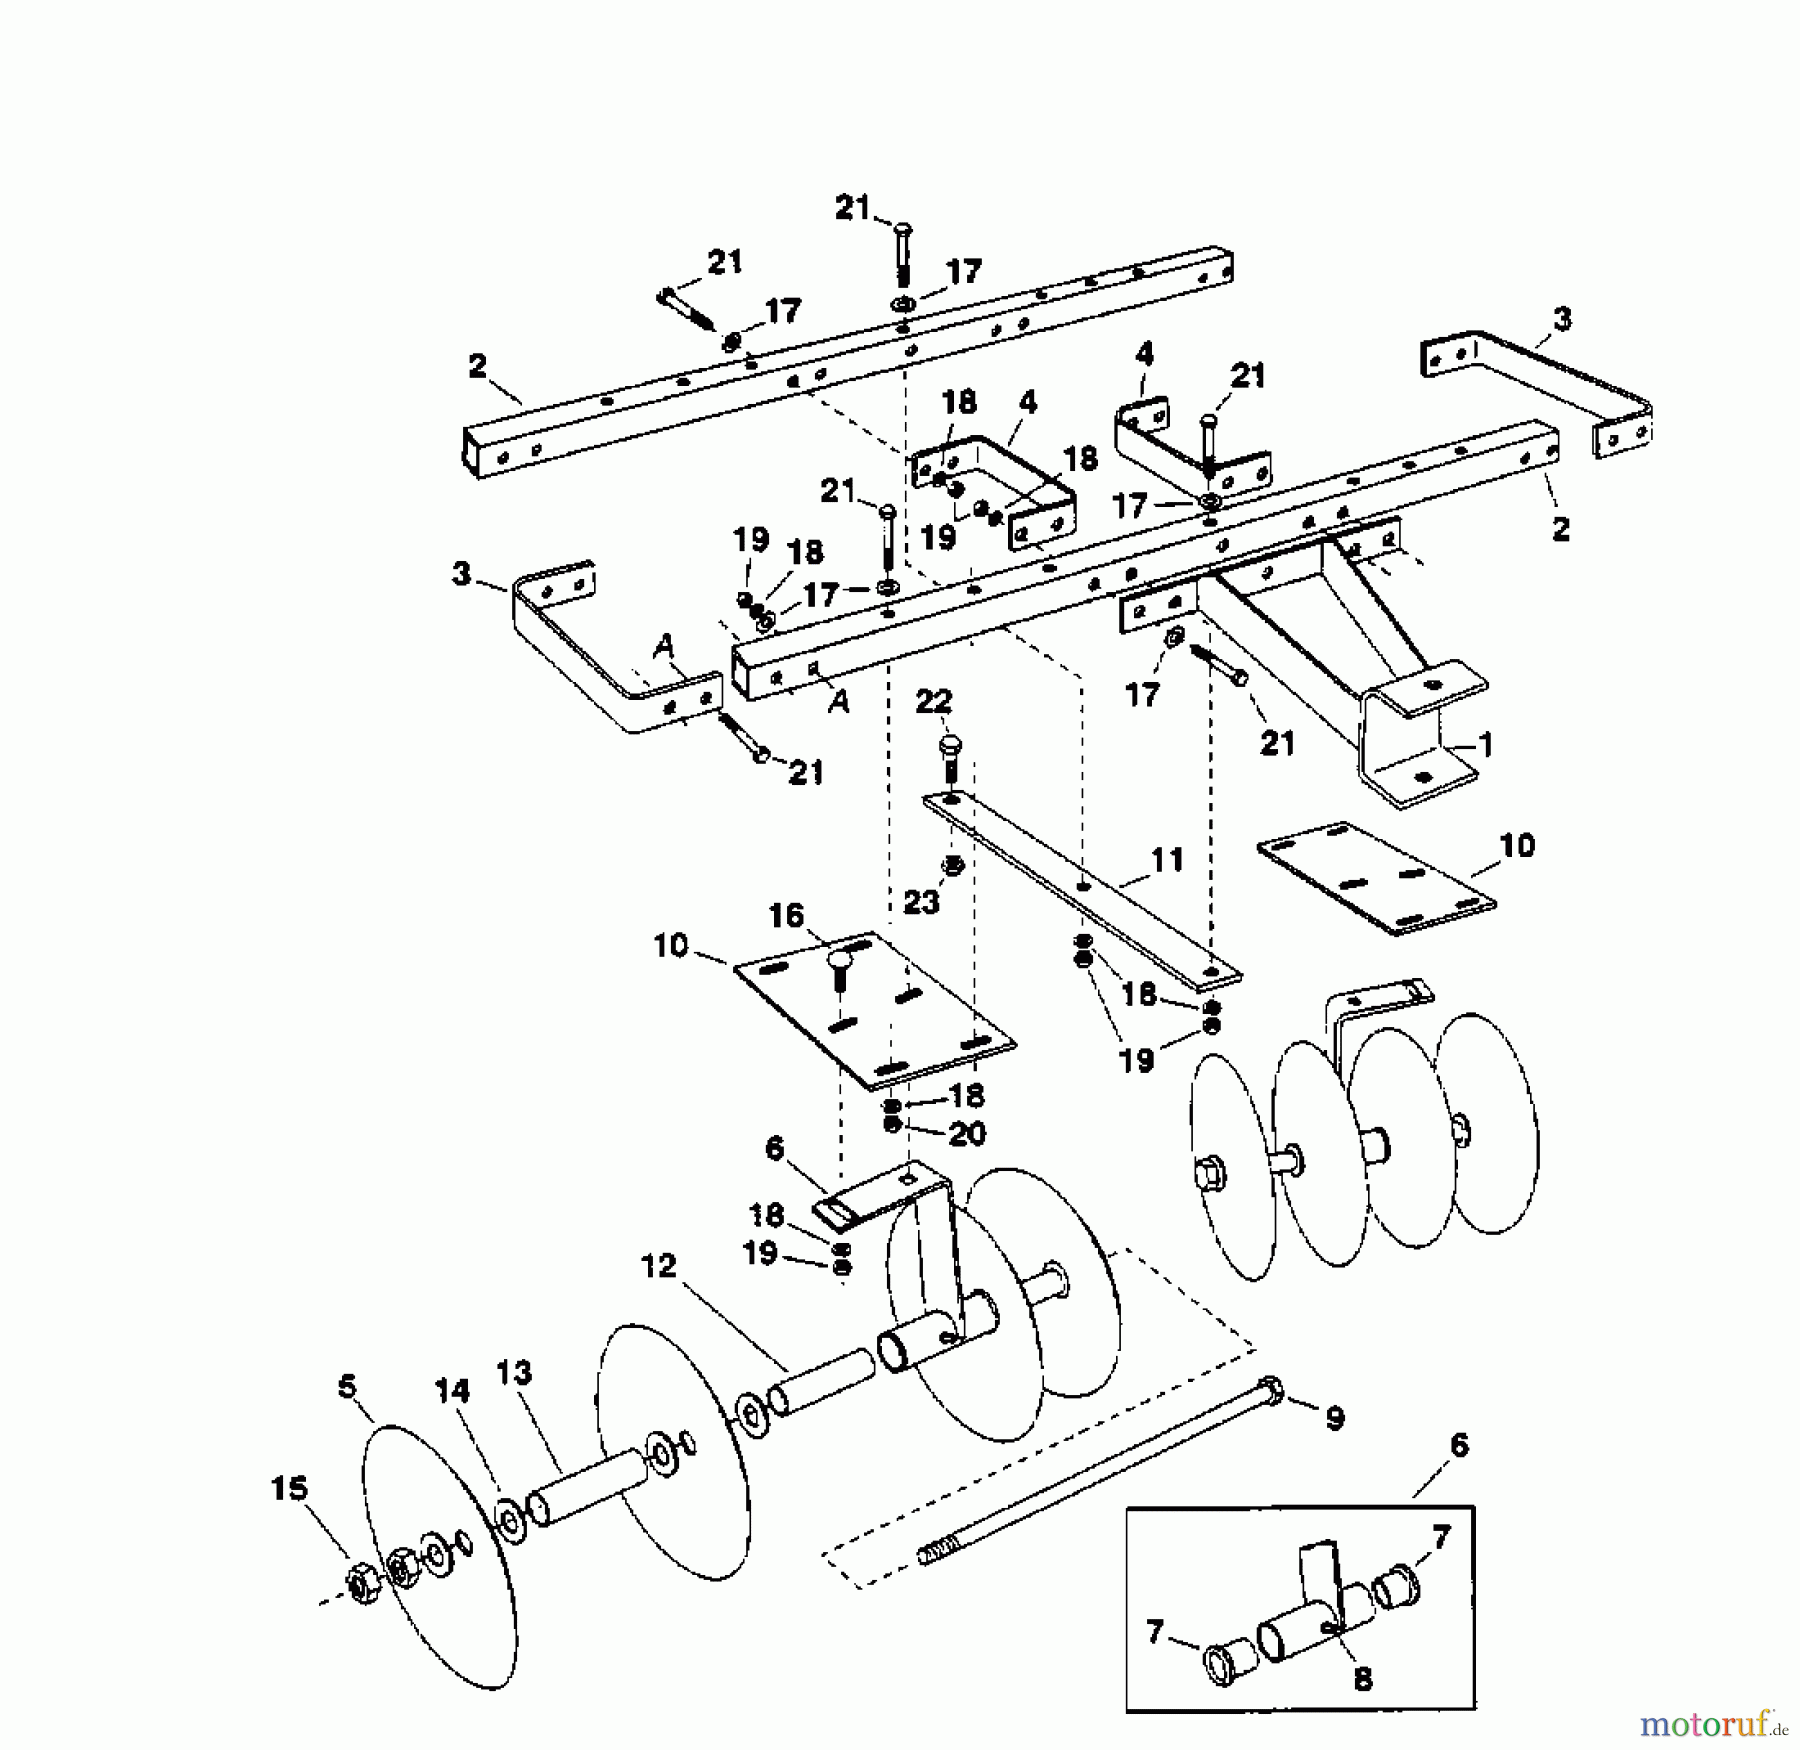  MTD Accessories Accessories garden and lawn tractors Cultivator 45-0266  (OEM-190-980) OEM-190-980  (2001) Basic machine